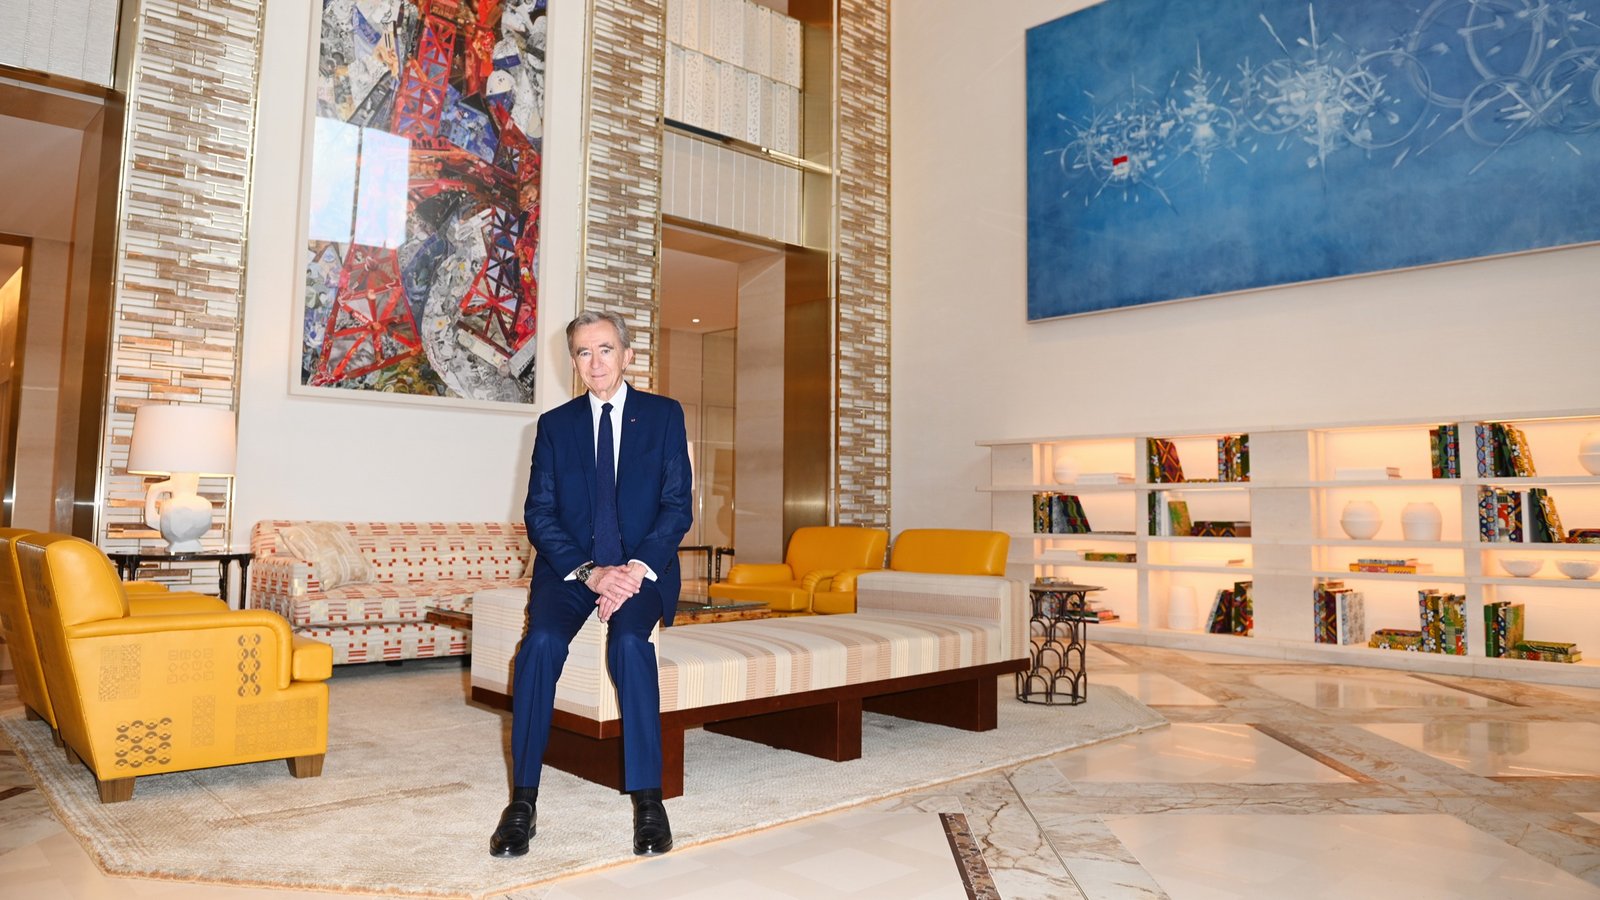 The $100 Billion Man: How Bernard Arnault Stitched Together The World's  Third Biggest Fortune With Louis Vuitton, Dior And 77 Other Brands—And Why  He's Not Done Yet